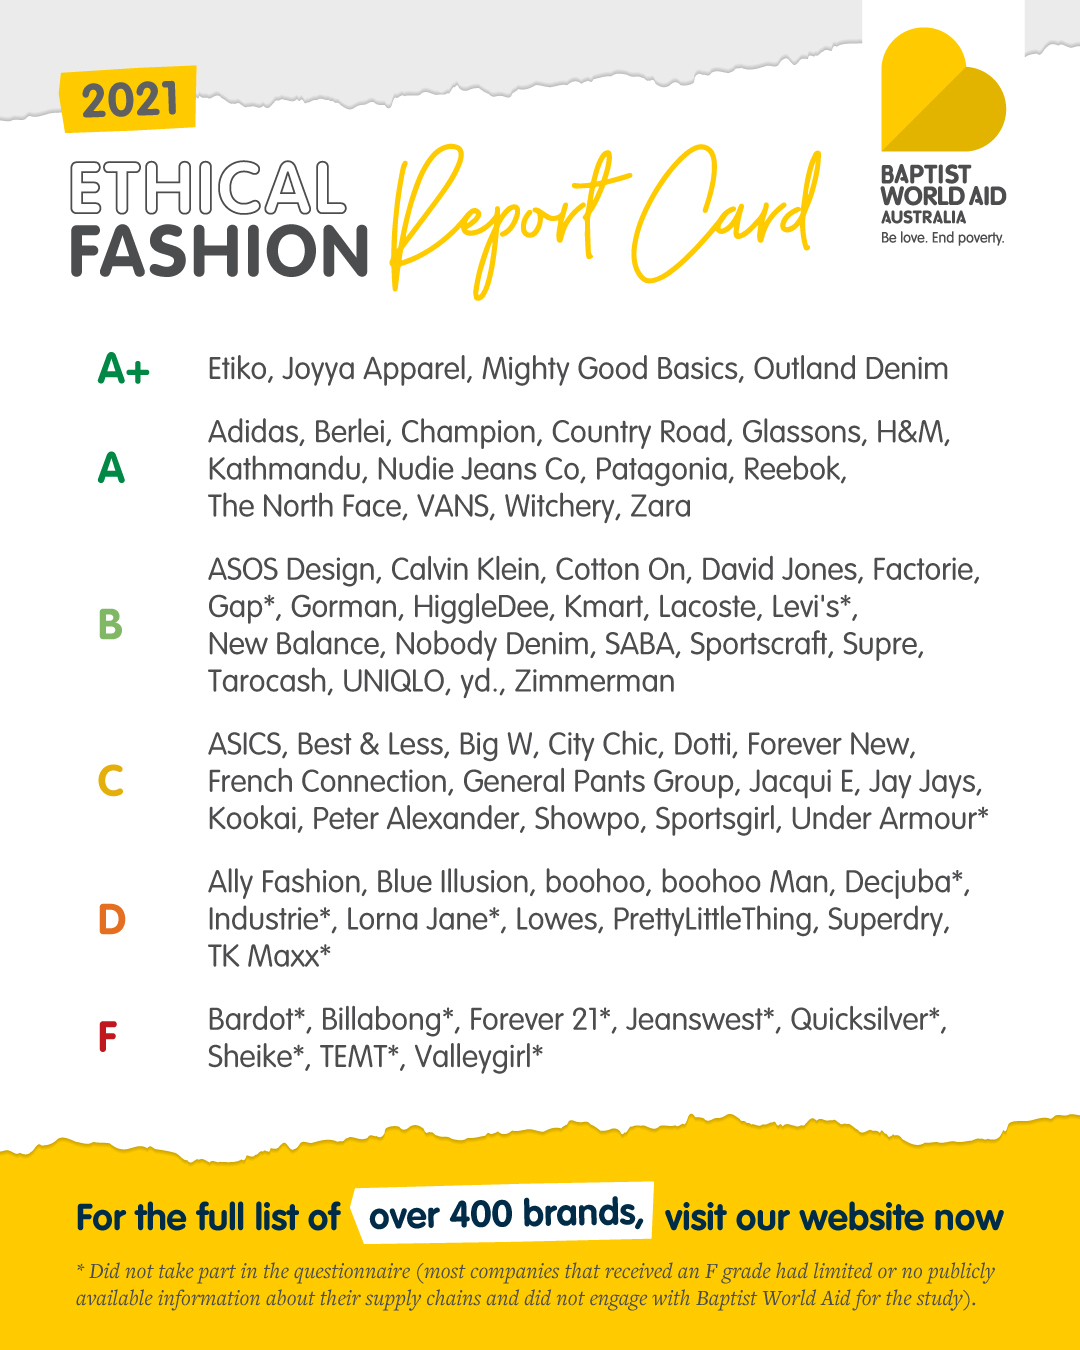 the 2021 ethical fashion report card, rating a number of brands from A+ to F 